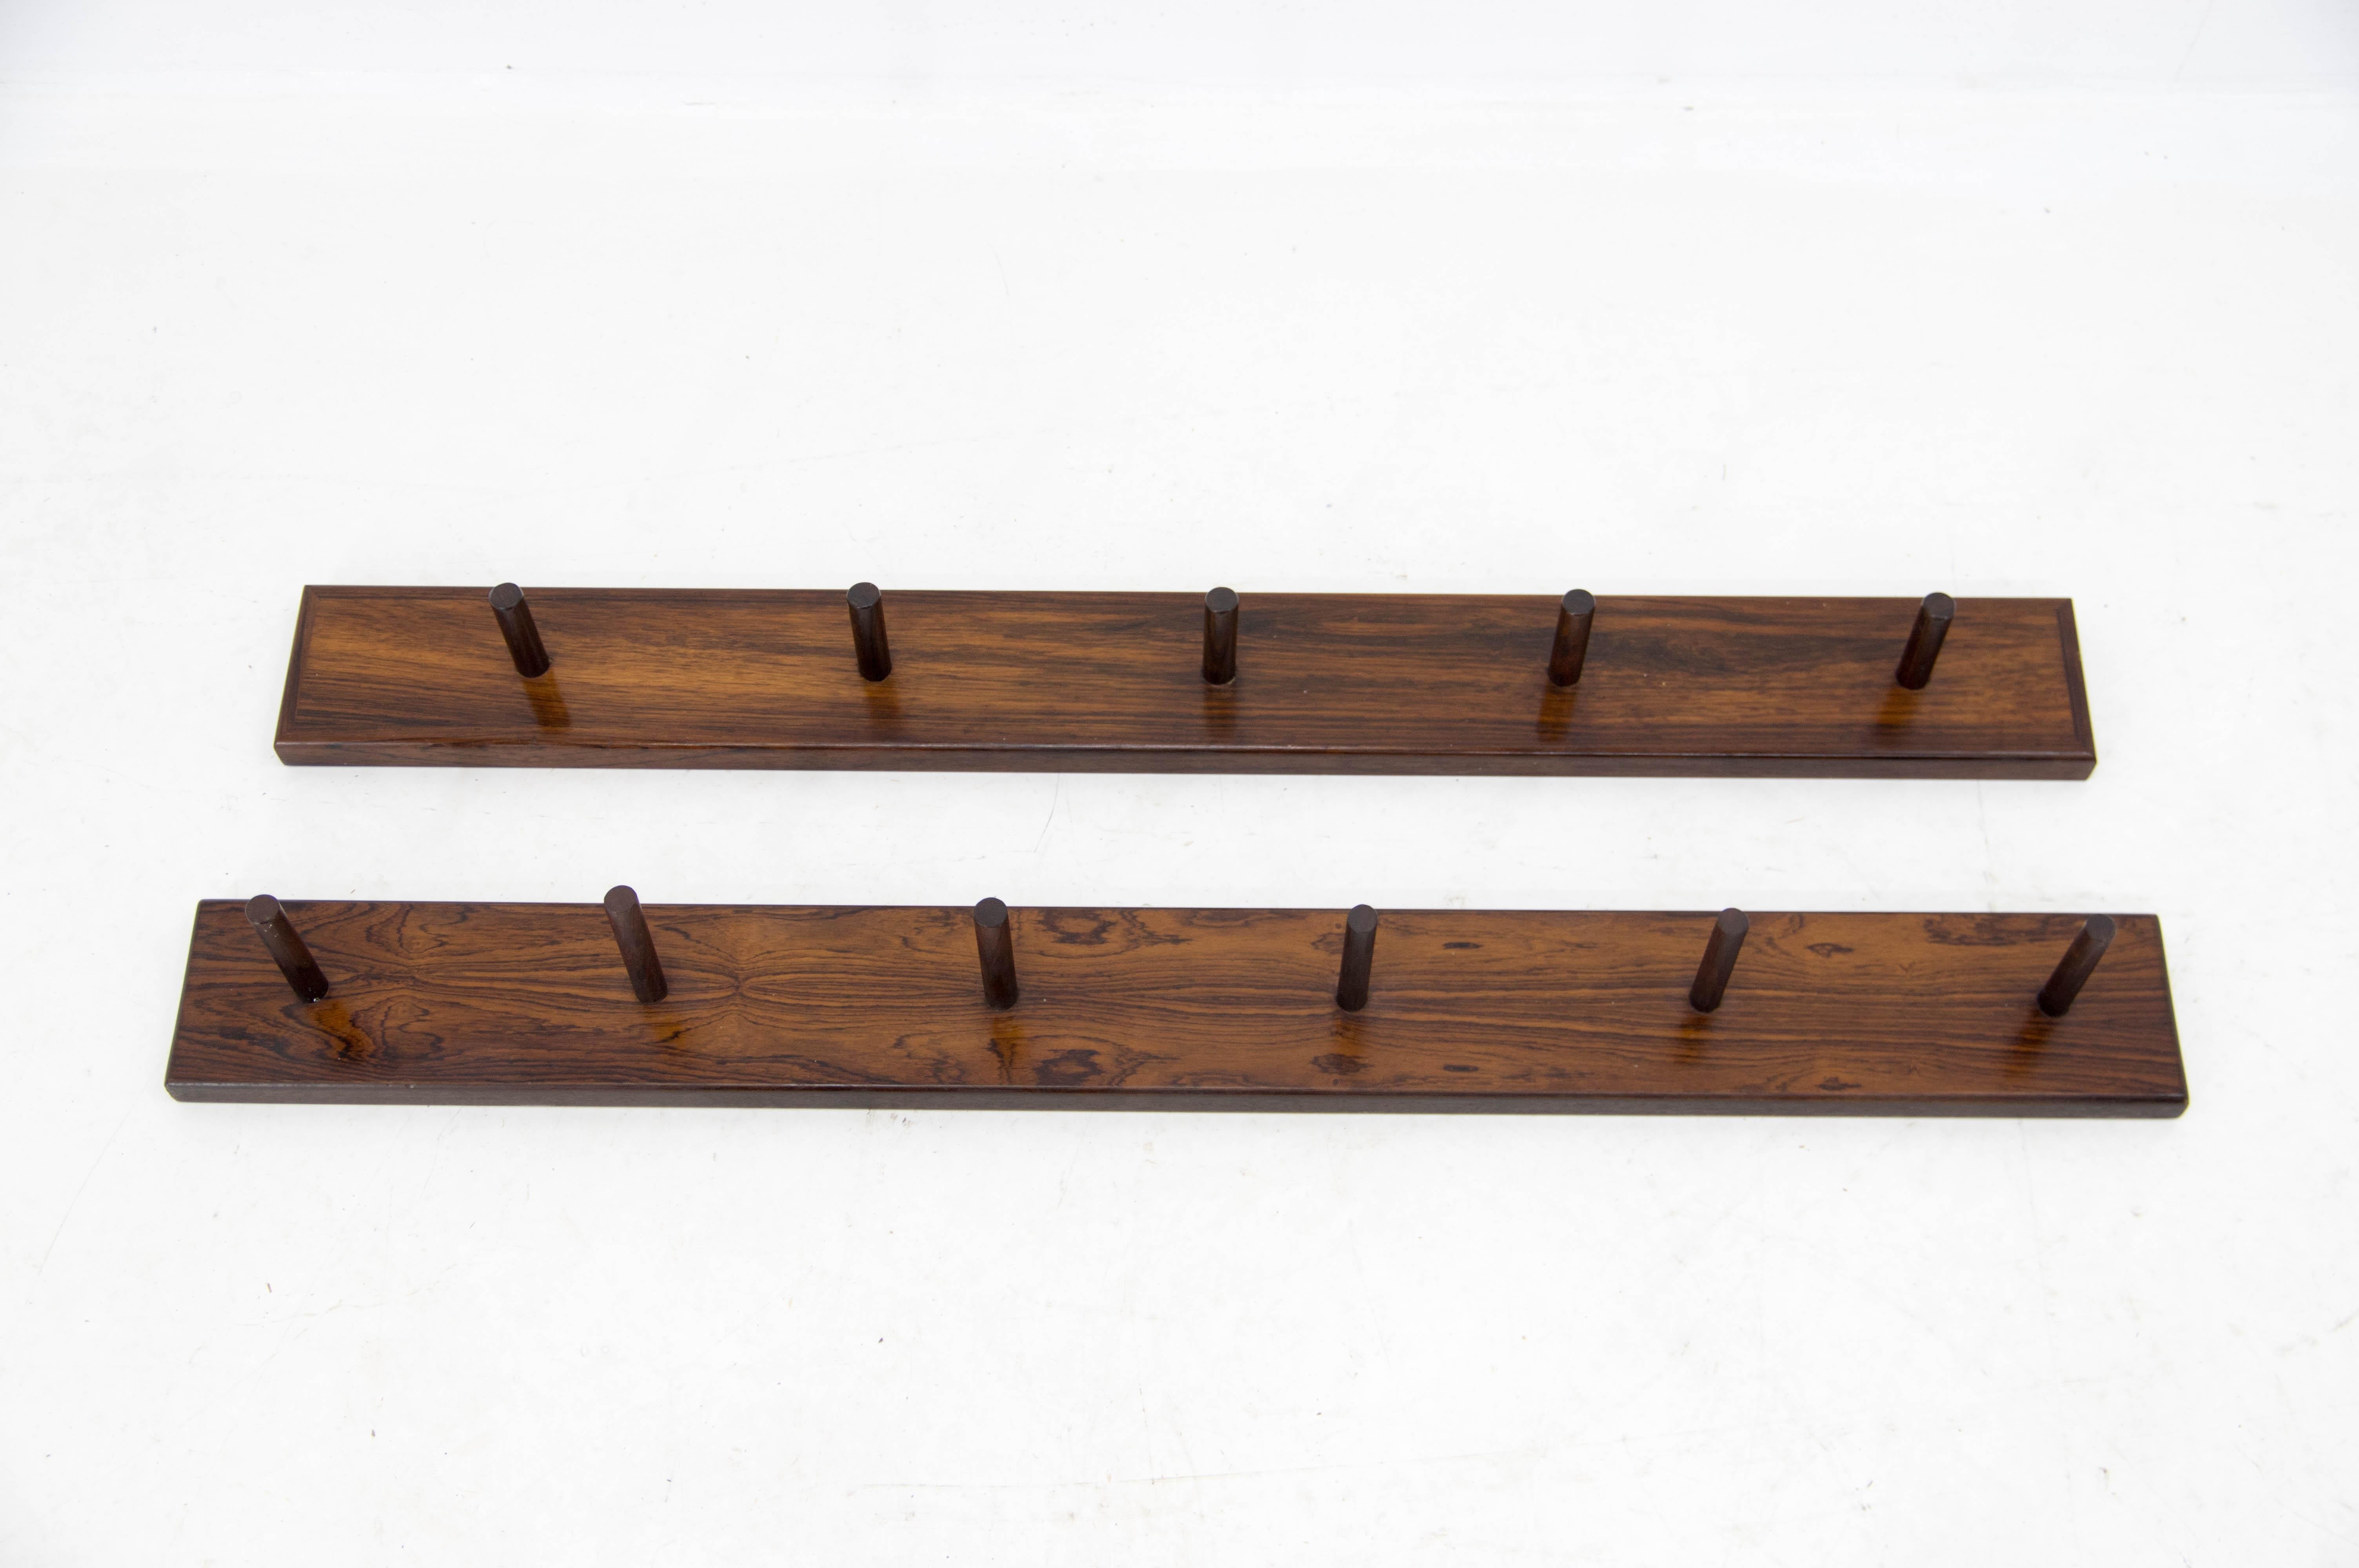 Made of solid rosewood.
The width of bigger one: 104cm
The width of smaller one: 99cm.